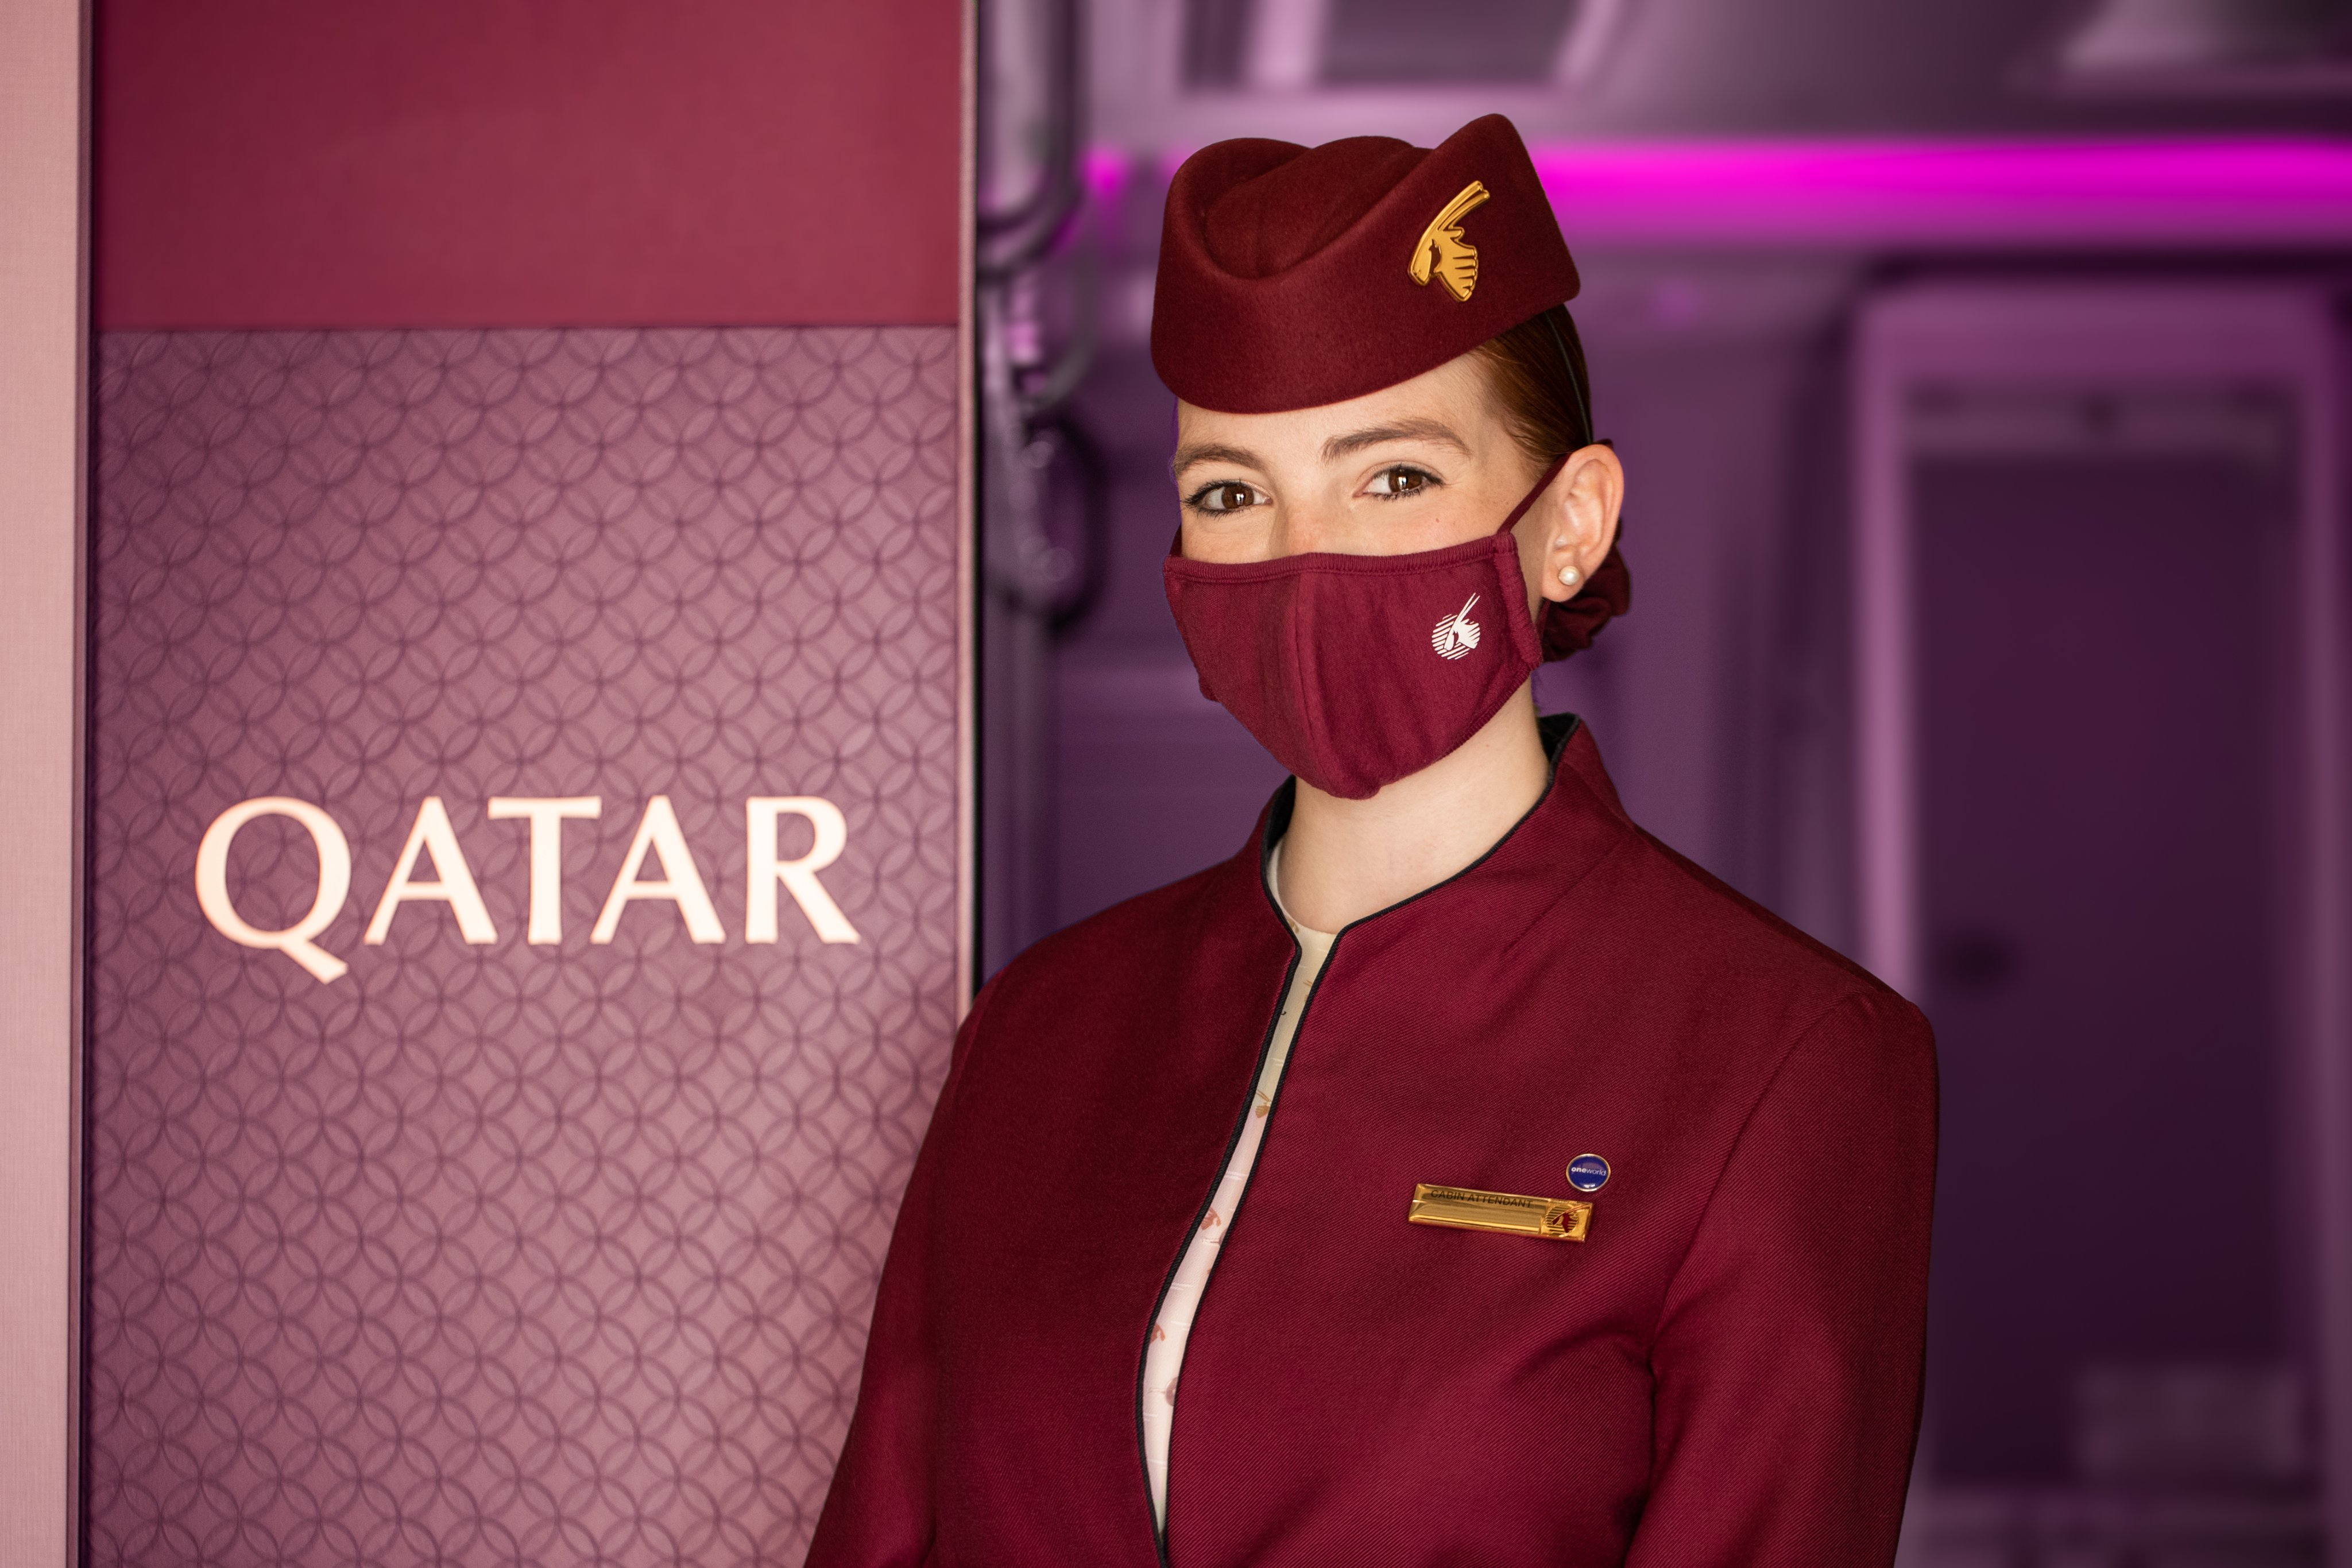 Qatar Airways on X: "From the moment you step on board, we will treat you  to our signature five-star service. Our highly-skilled cabin crew are  looking forward to taking care of your